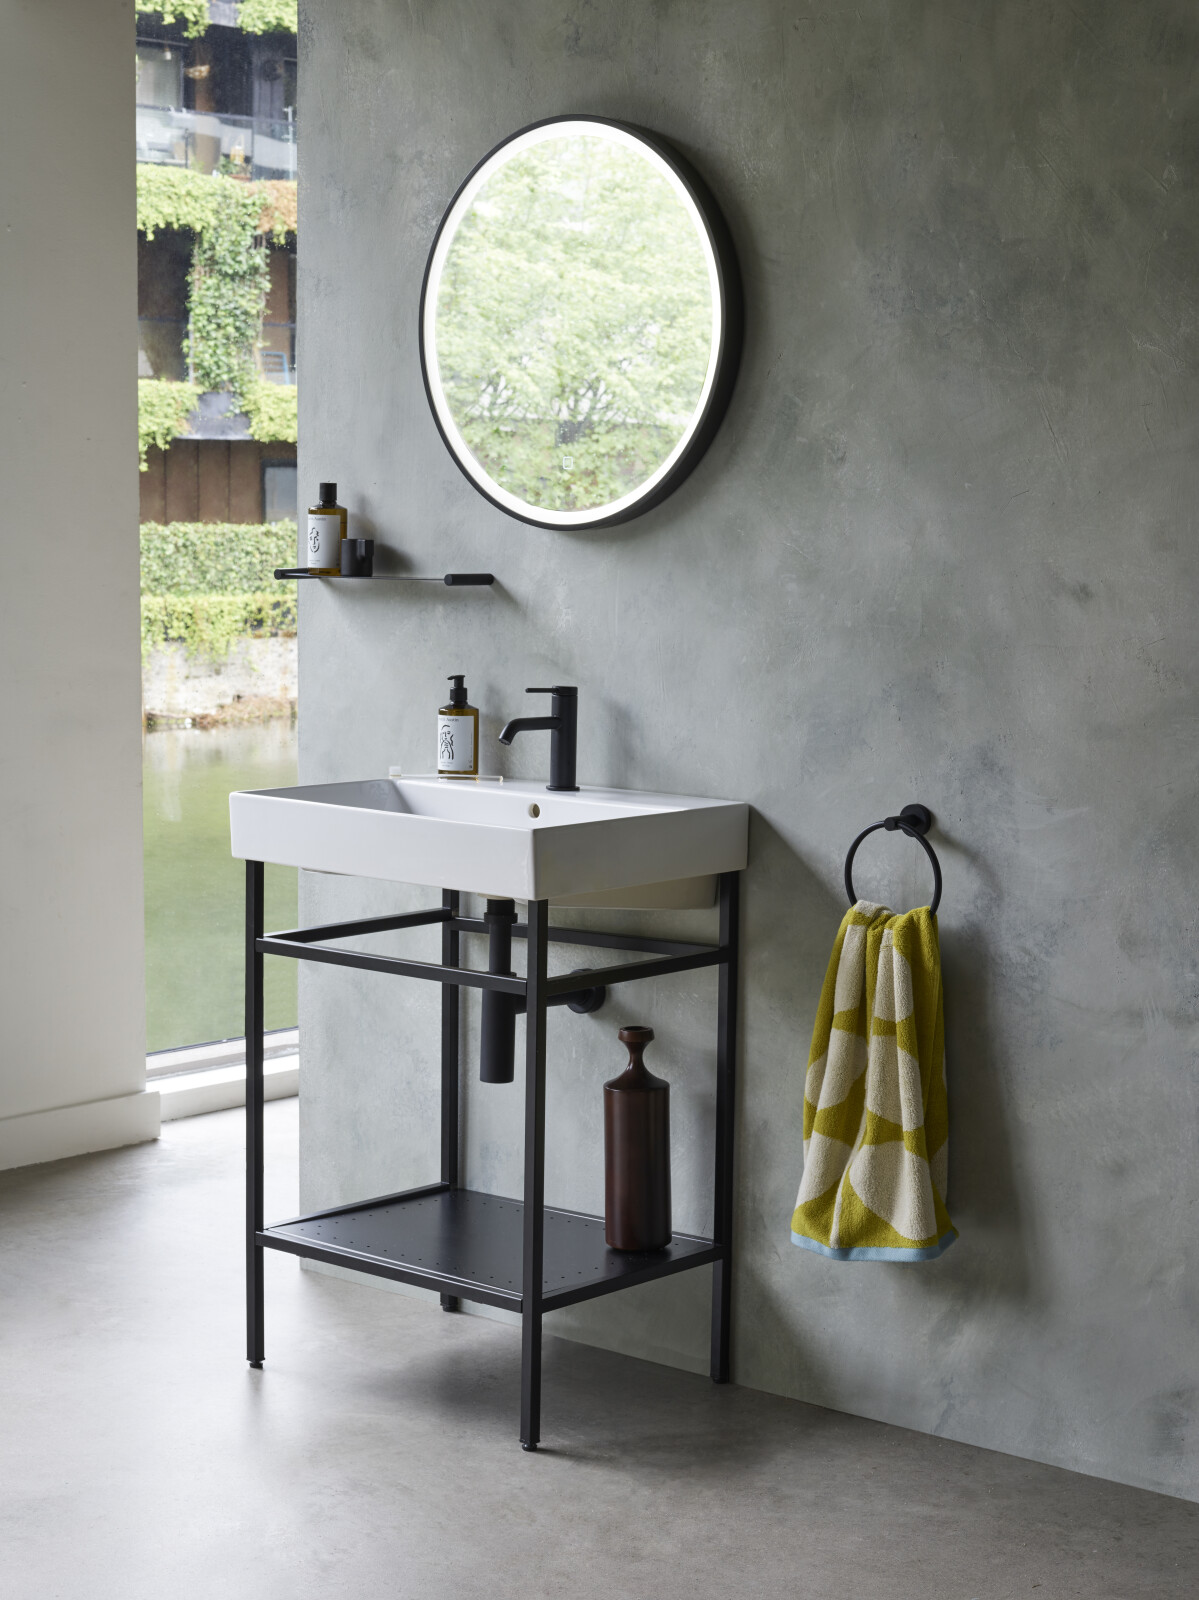 Product Lifestyle image of the Britton Bathrooms Shoreditch Frame 600mm Furniture Stand and Basin